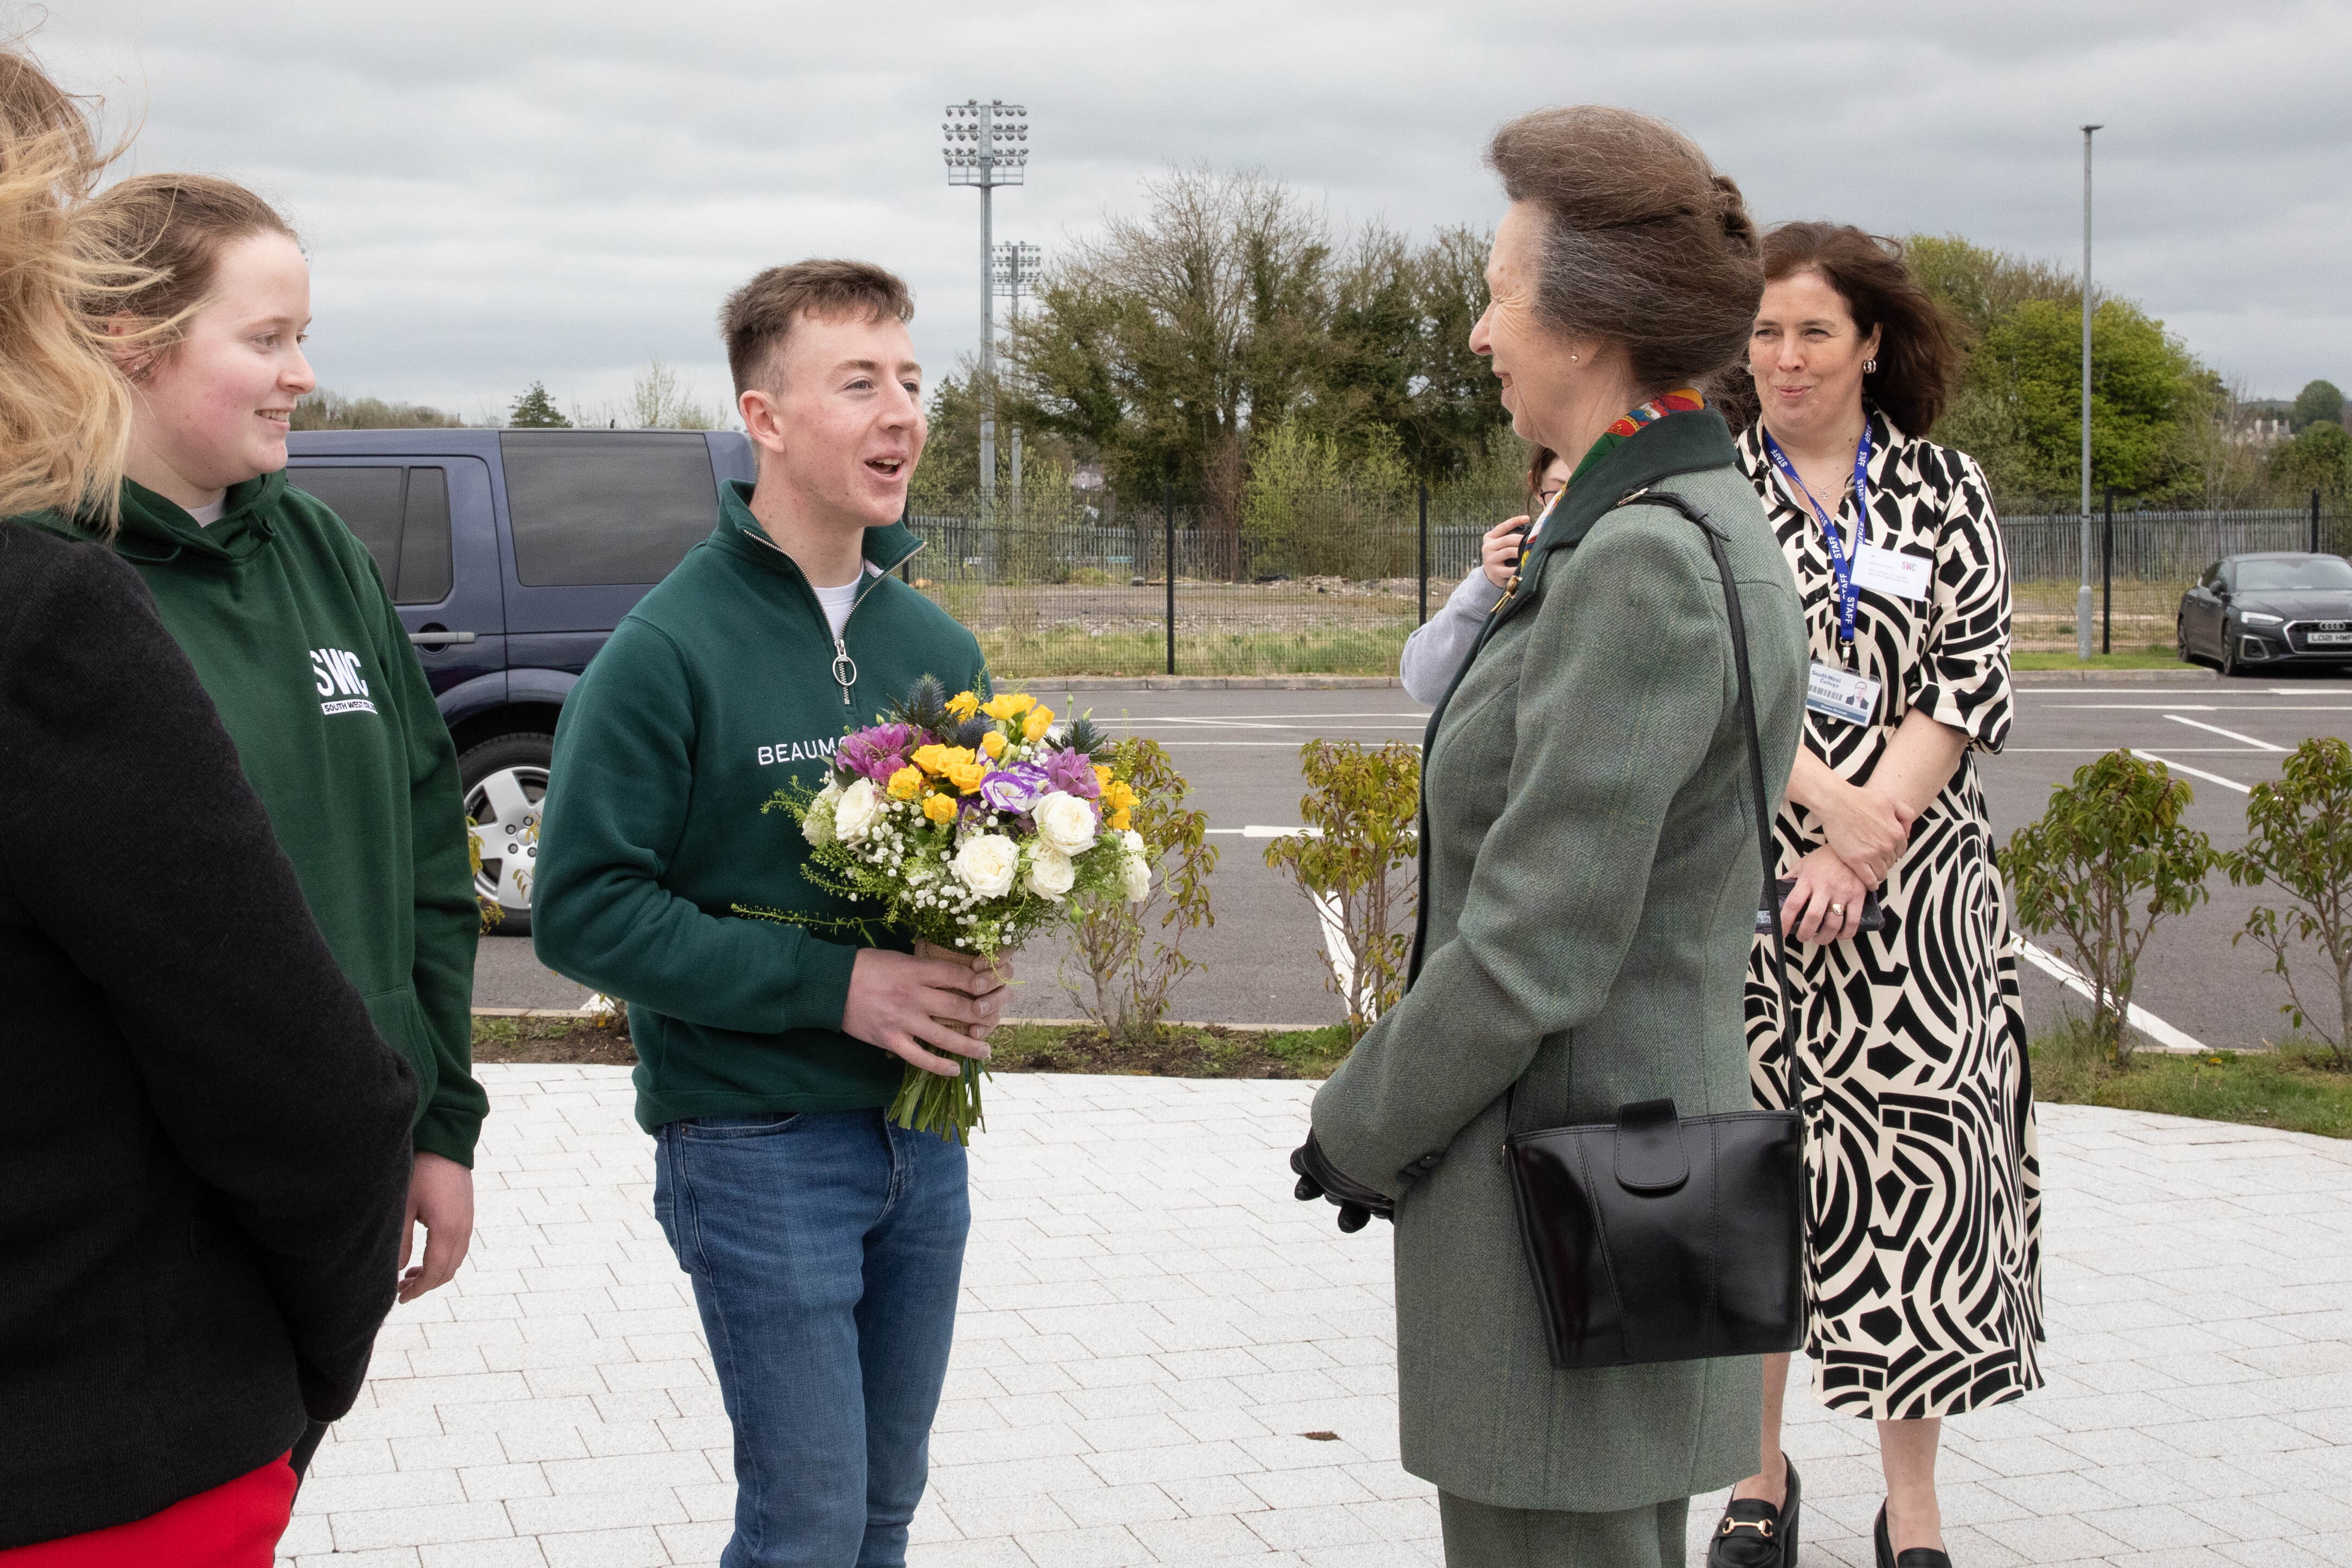 Her Royal Highness, The Princess Royal was presented with a number of gifts from South West College students, Linda Thompson from Enniskillen and Jamie Livingston from Portadown during her visit to the Erne Campus.